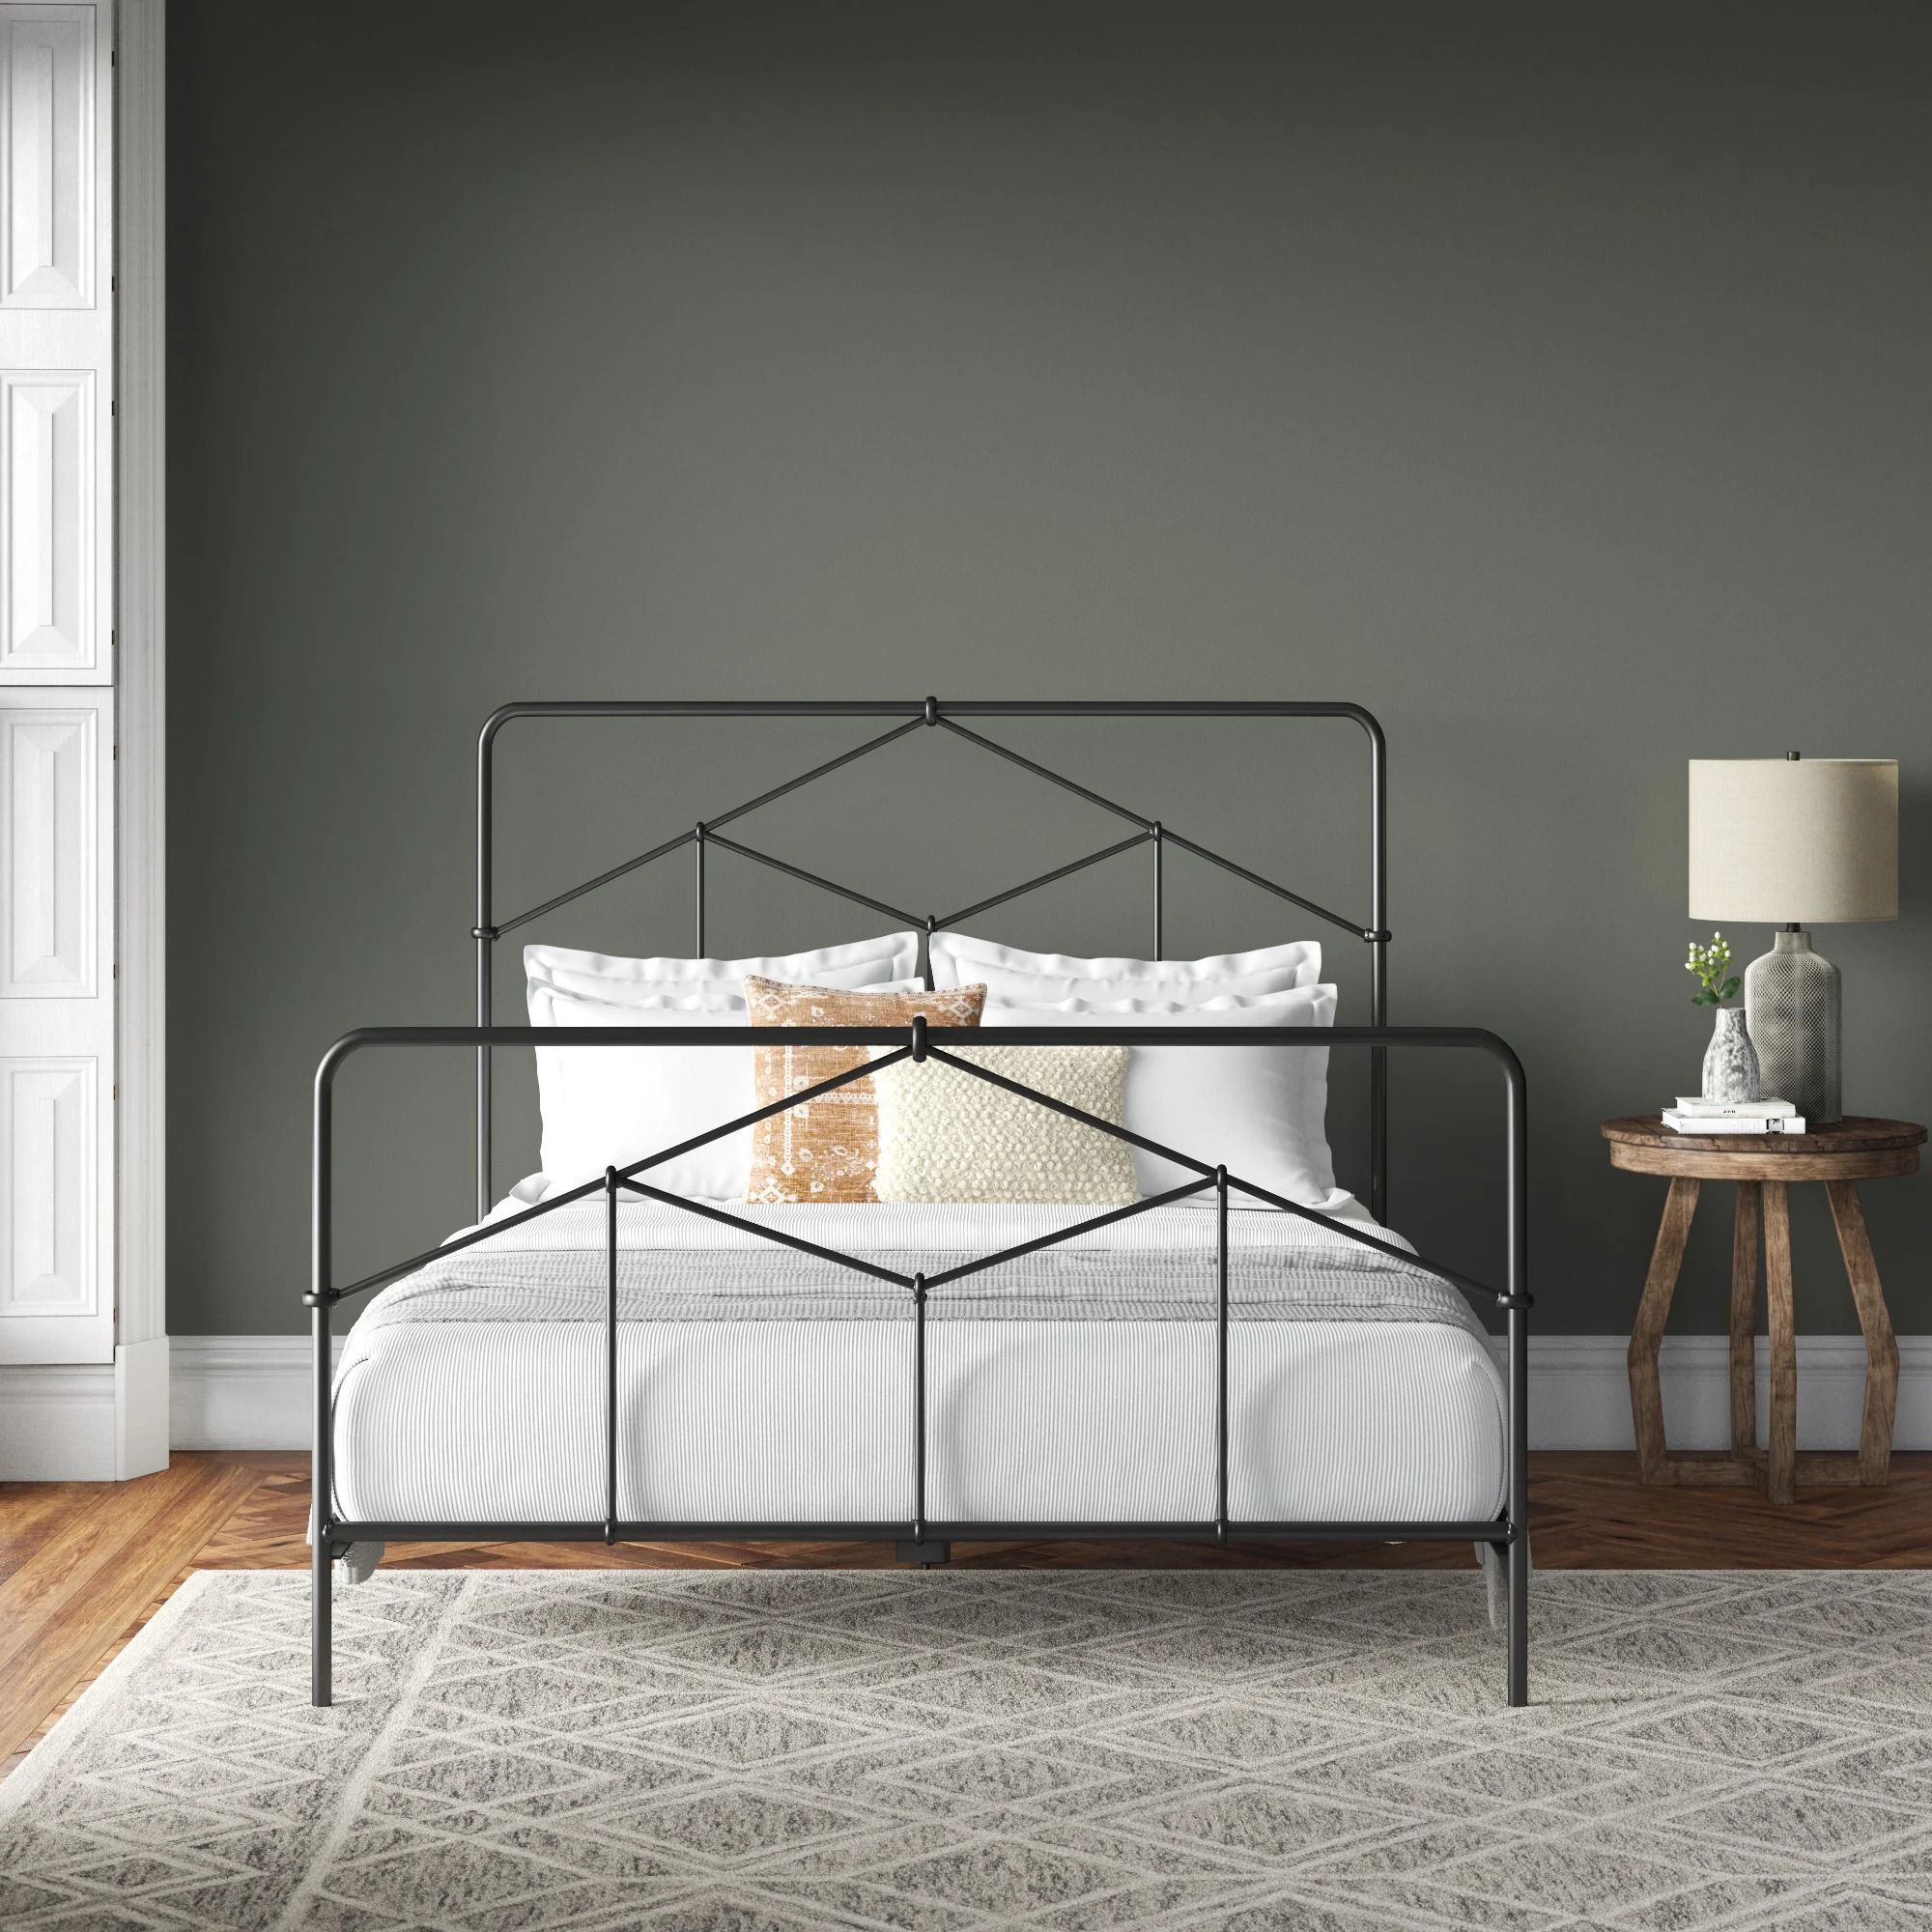 10 Best Box Spring Bed Frames Beds, Do Box Springs Make Beds More Comfortable